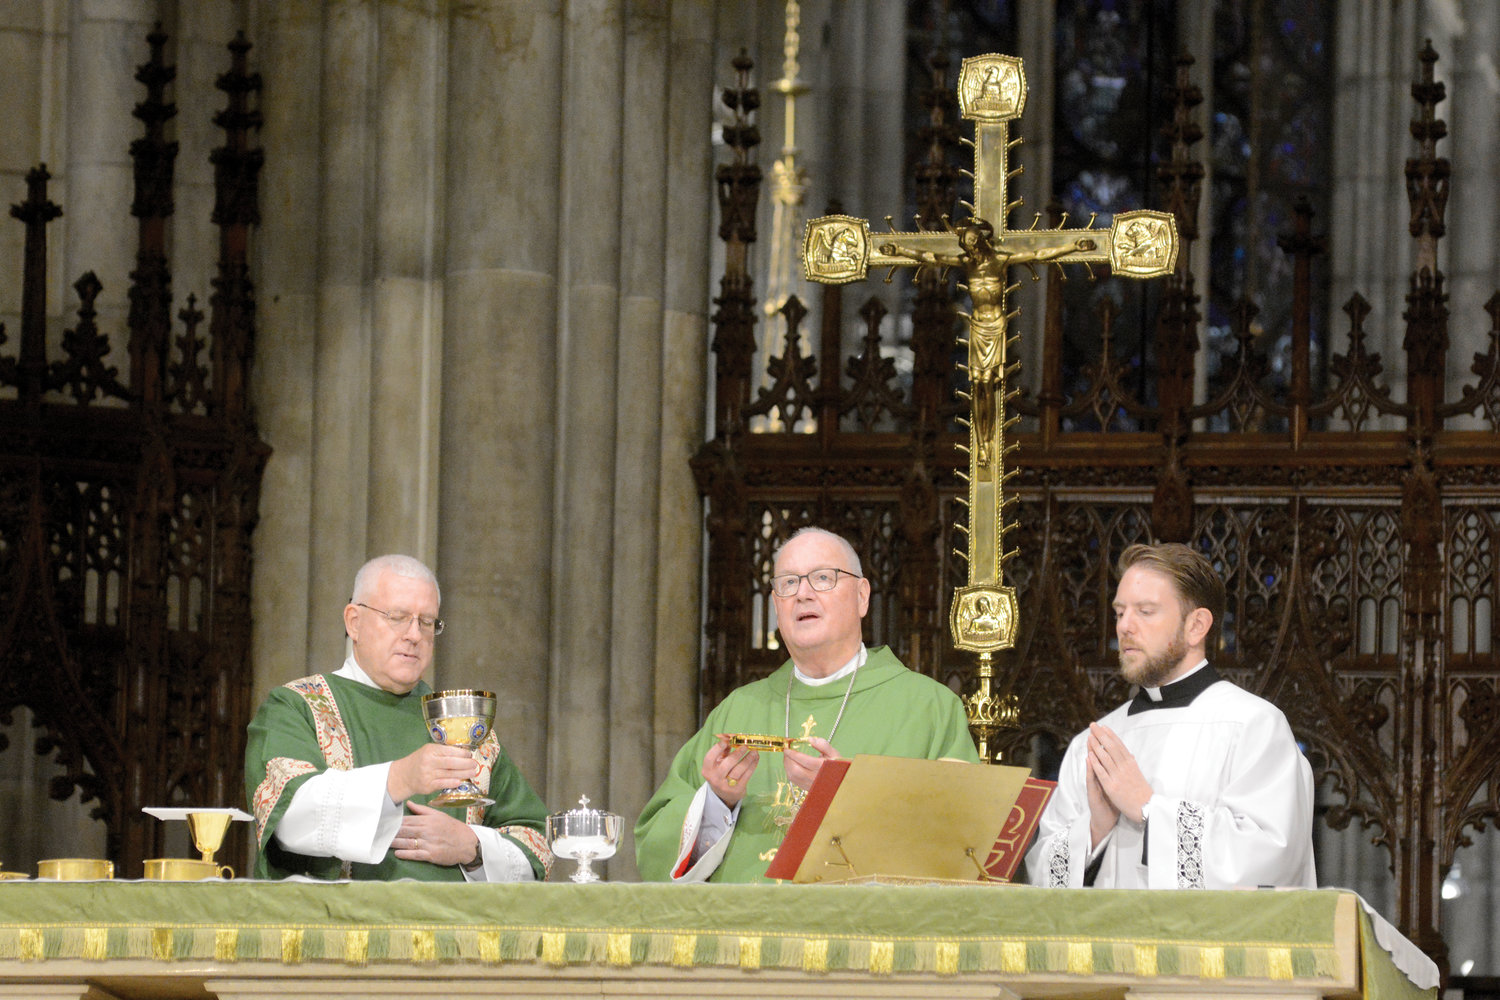 Deacon Maher holds the chalice at the altar.